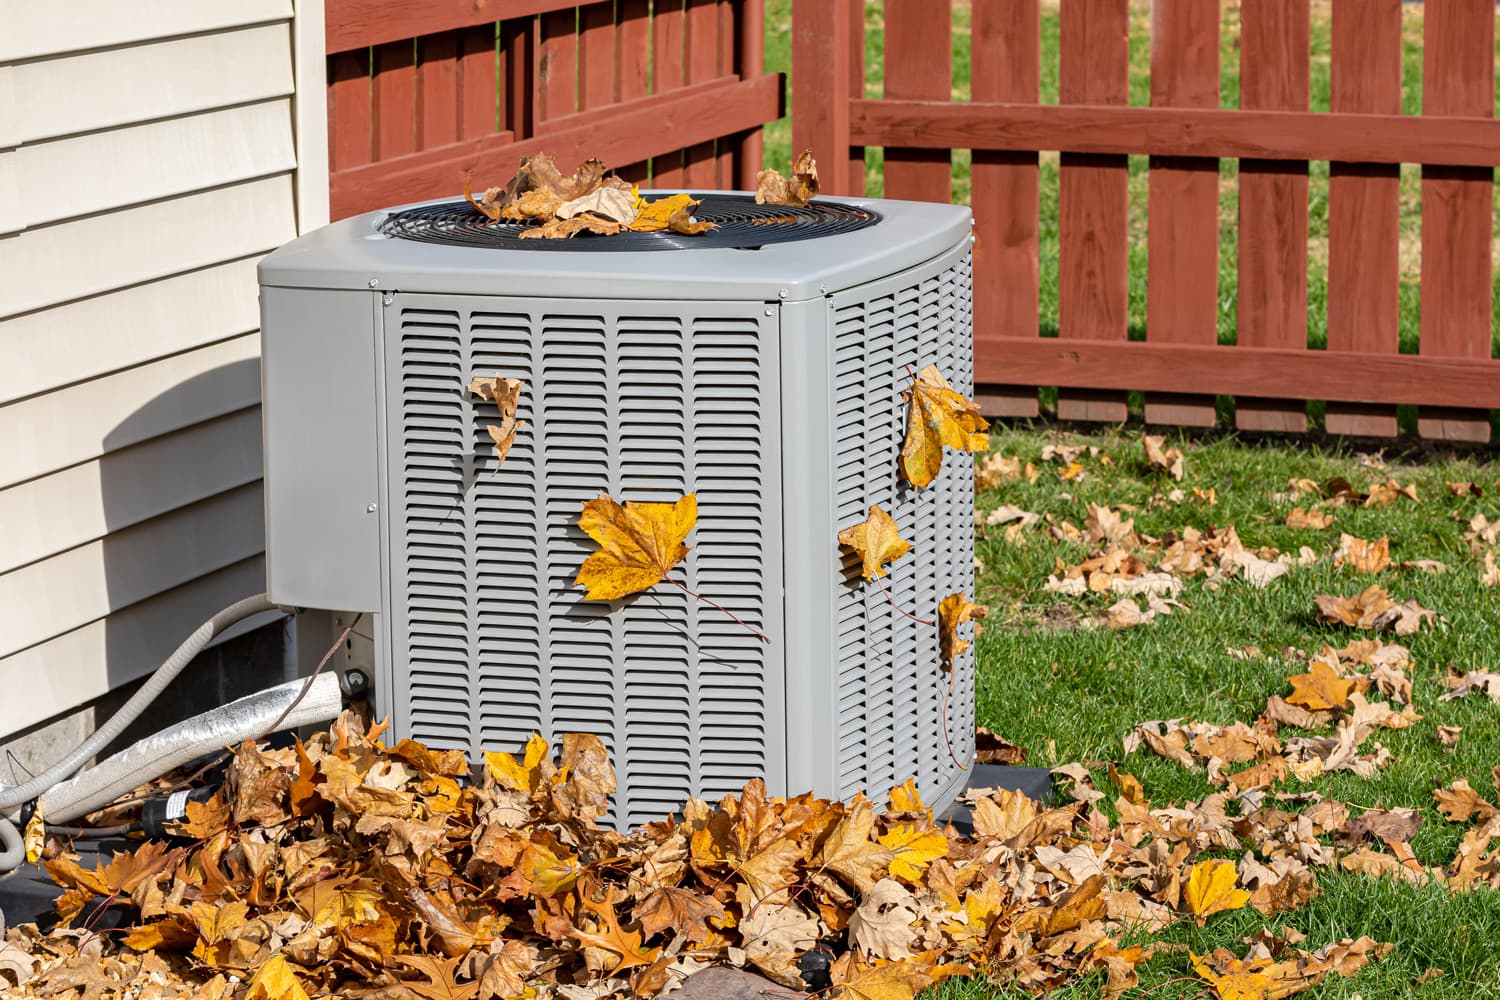 Dirty air conditioning unit covered in leaves during autumn. Home air conditioning, HVAC, repair, service, fall cleaning and maintenance.